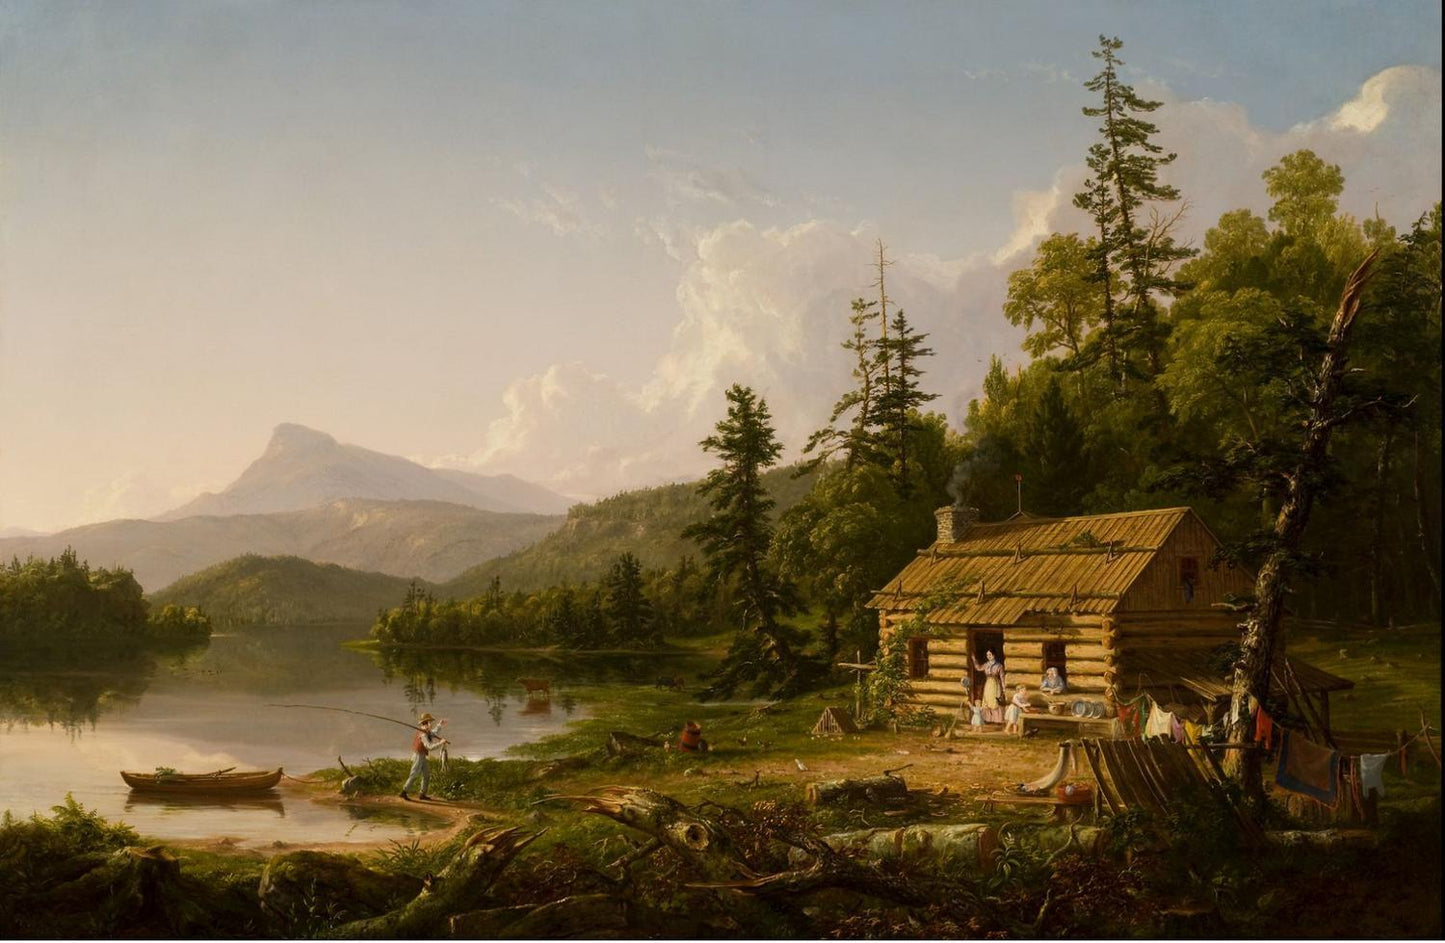 Home in the Woods (1847),Thomas Cole